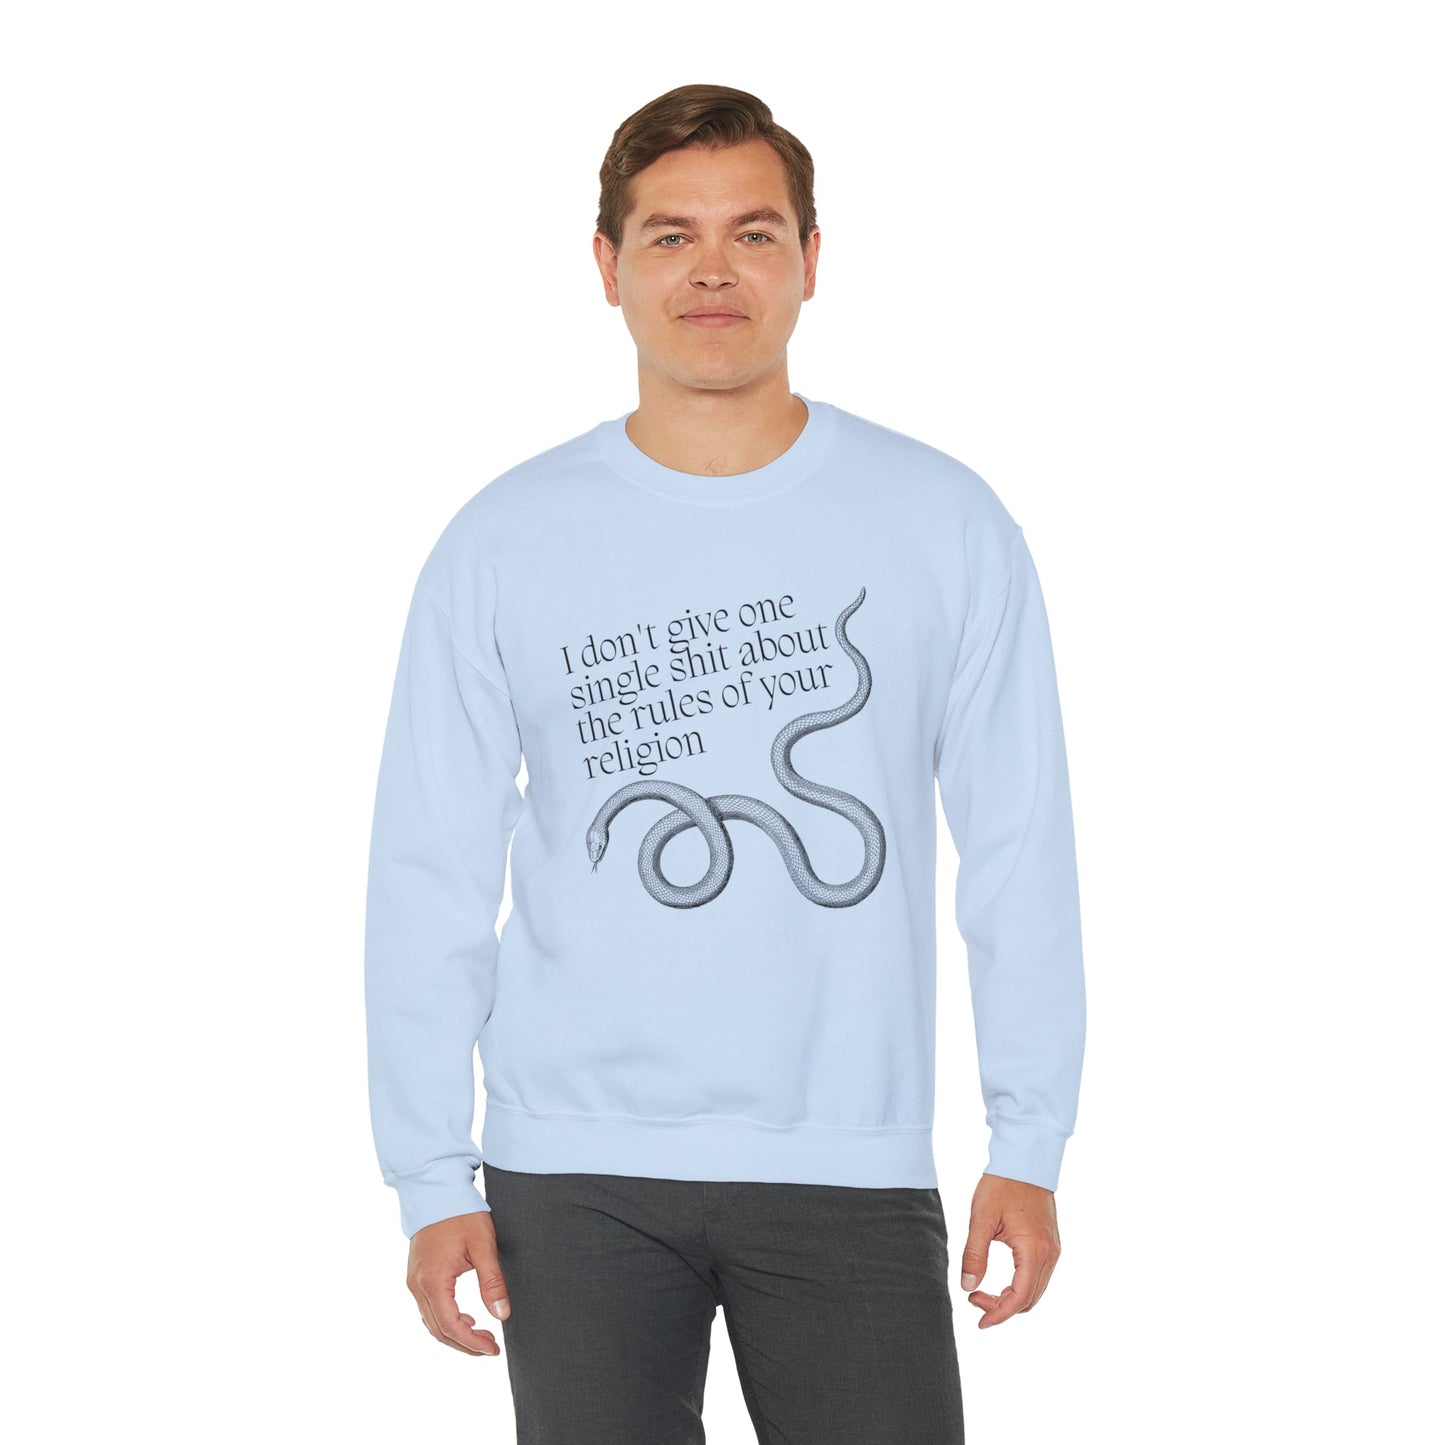 I Don't Give One Single Sh*t About the Rules of Your Religion Unisex Heavy Blend™ Crewneck Sweatshirt